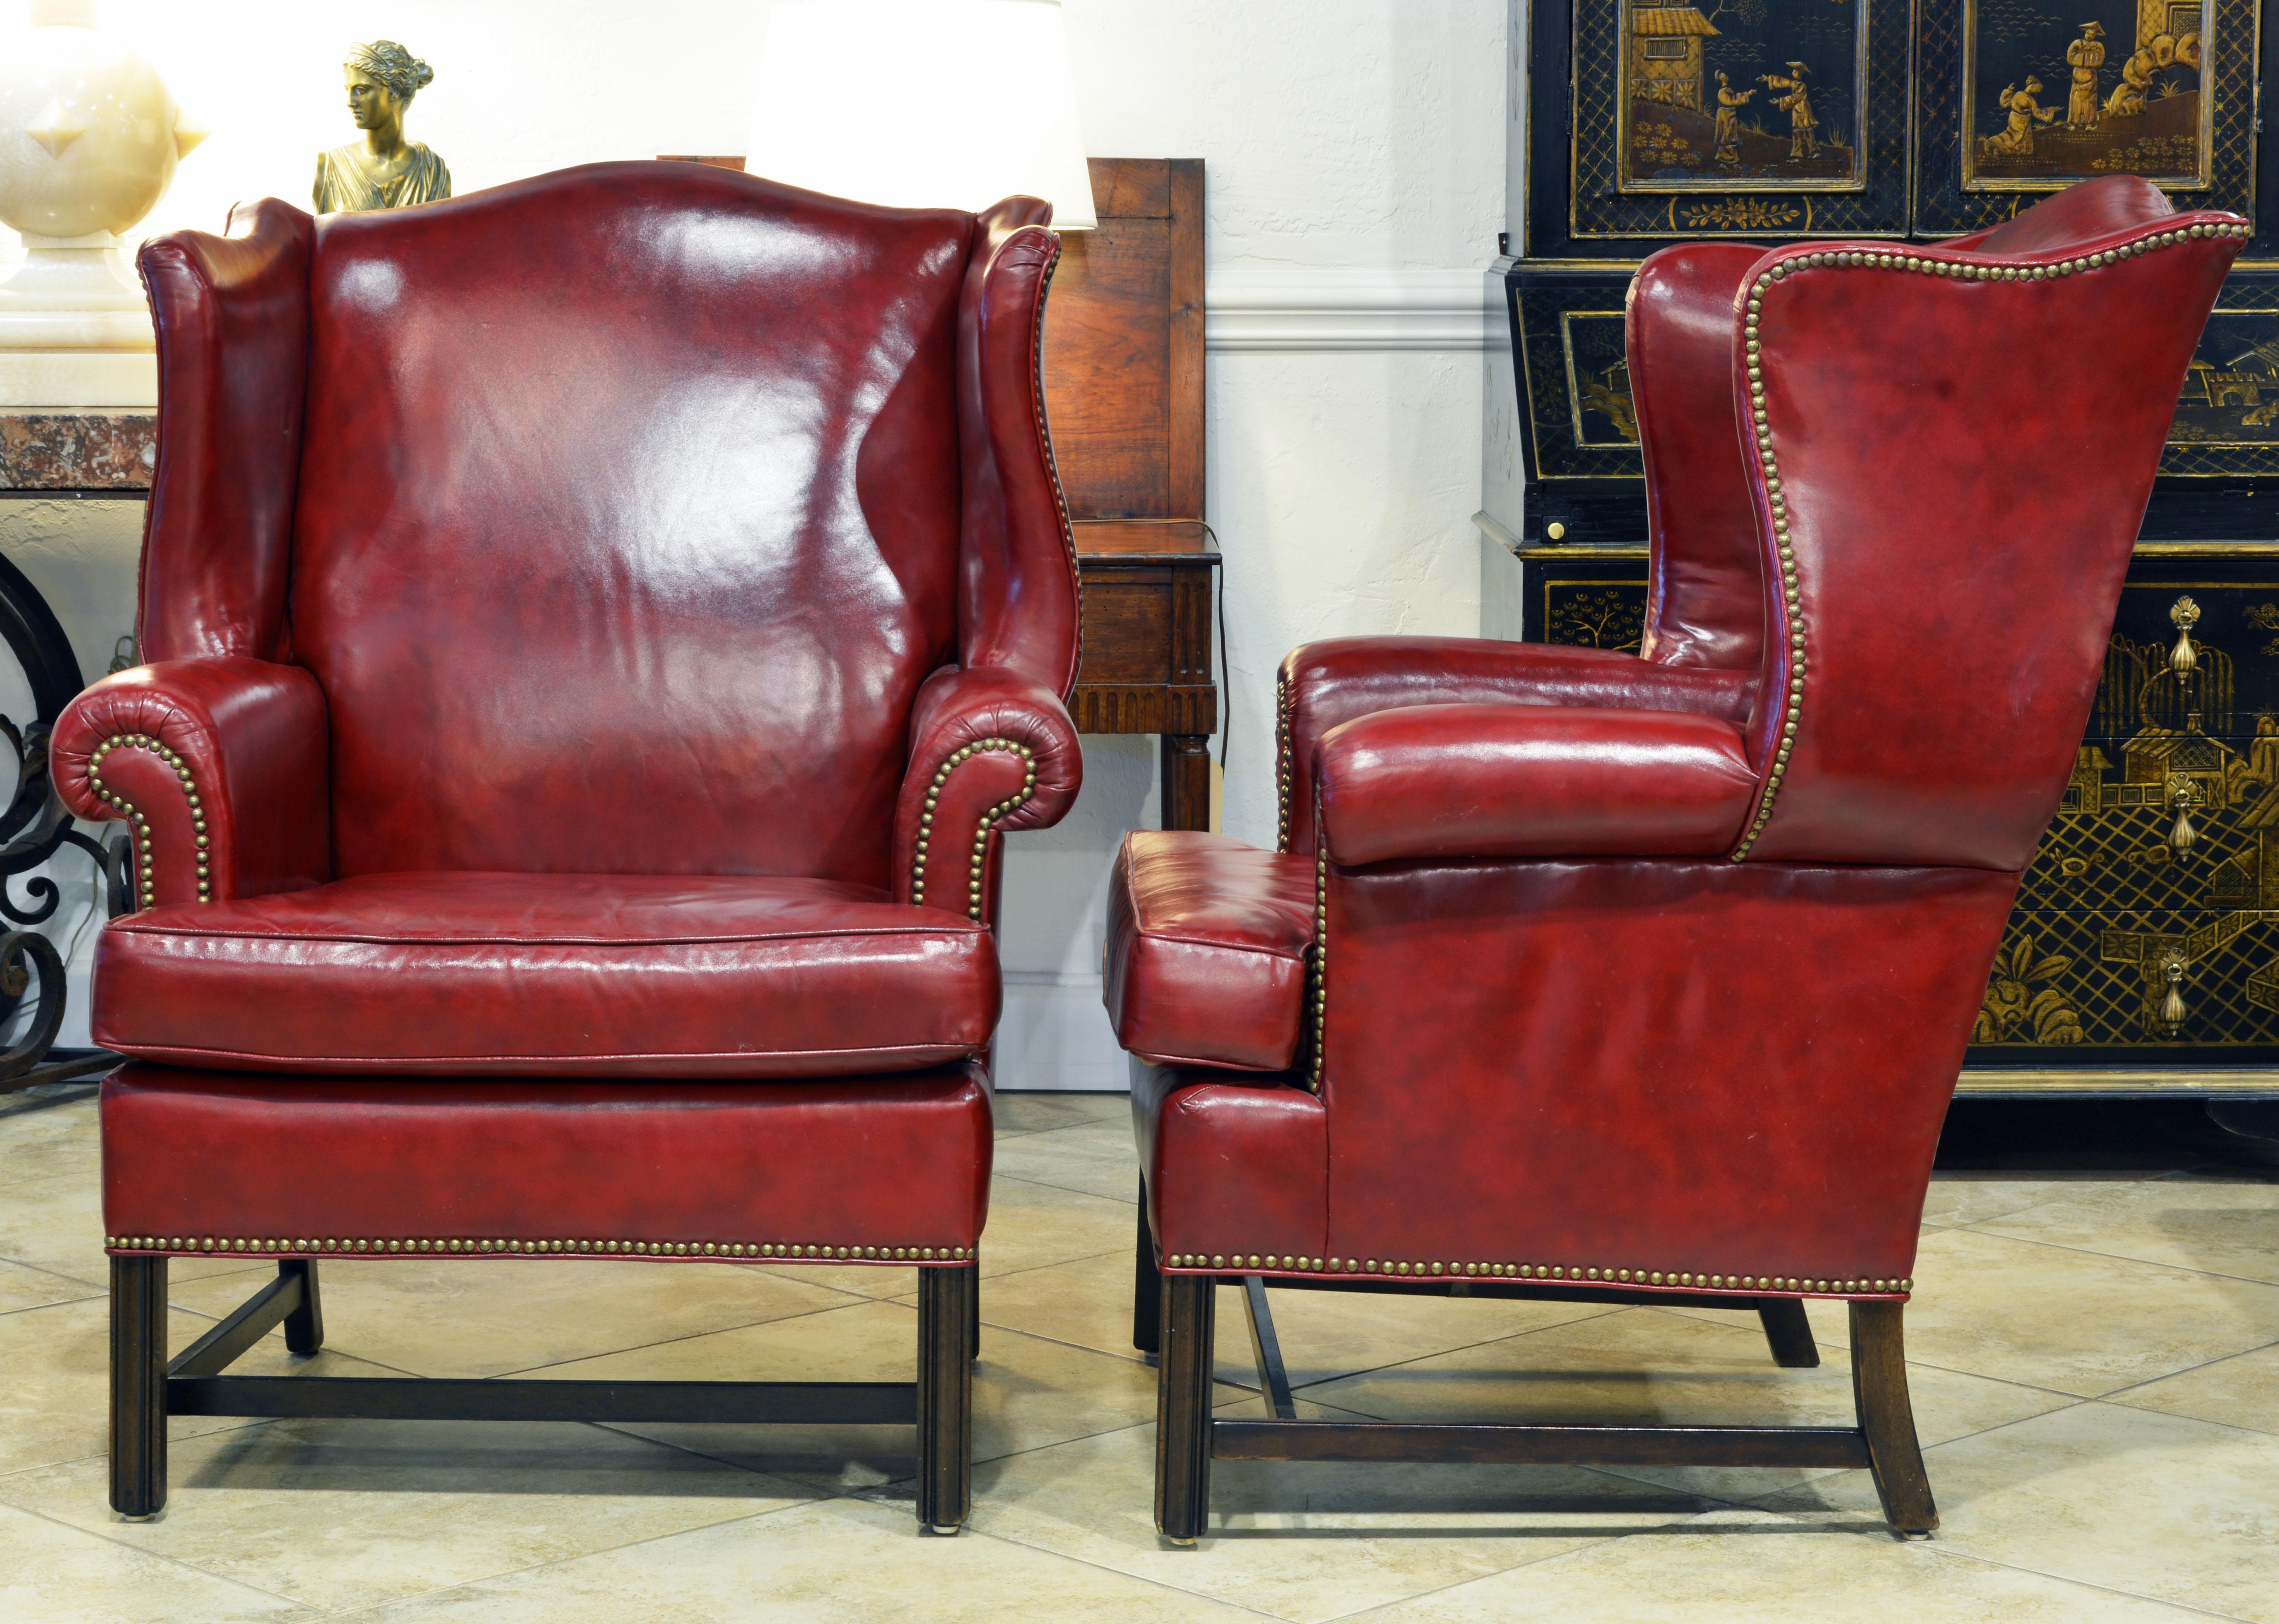 Queen Anne Pair of Vintage Chippendale  Style Nail-Head Trimmed Leather Wing Back Chairs